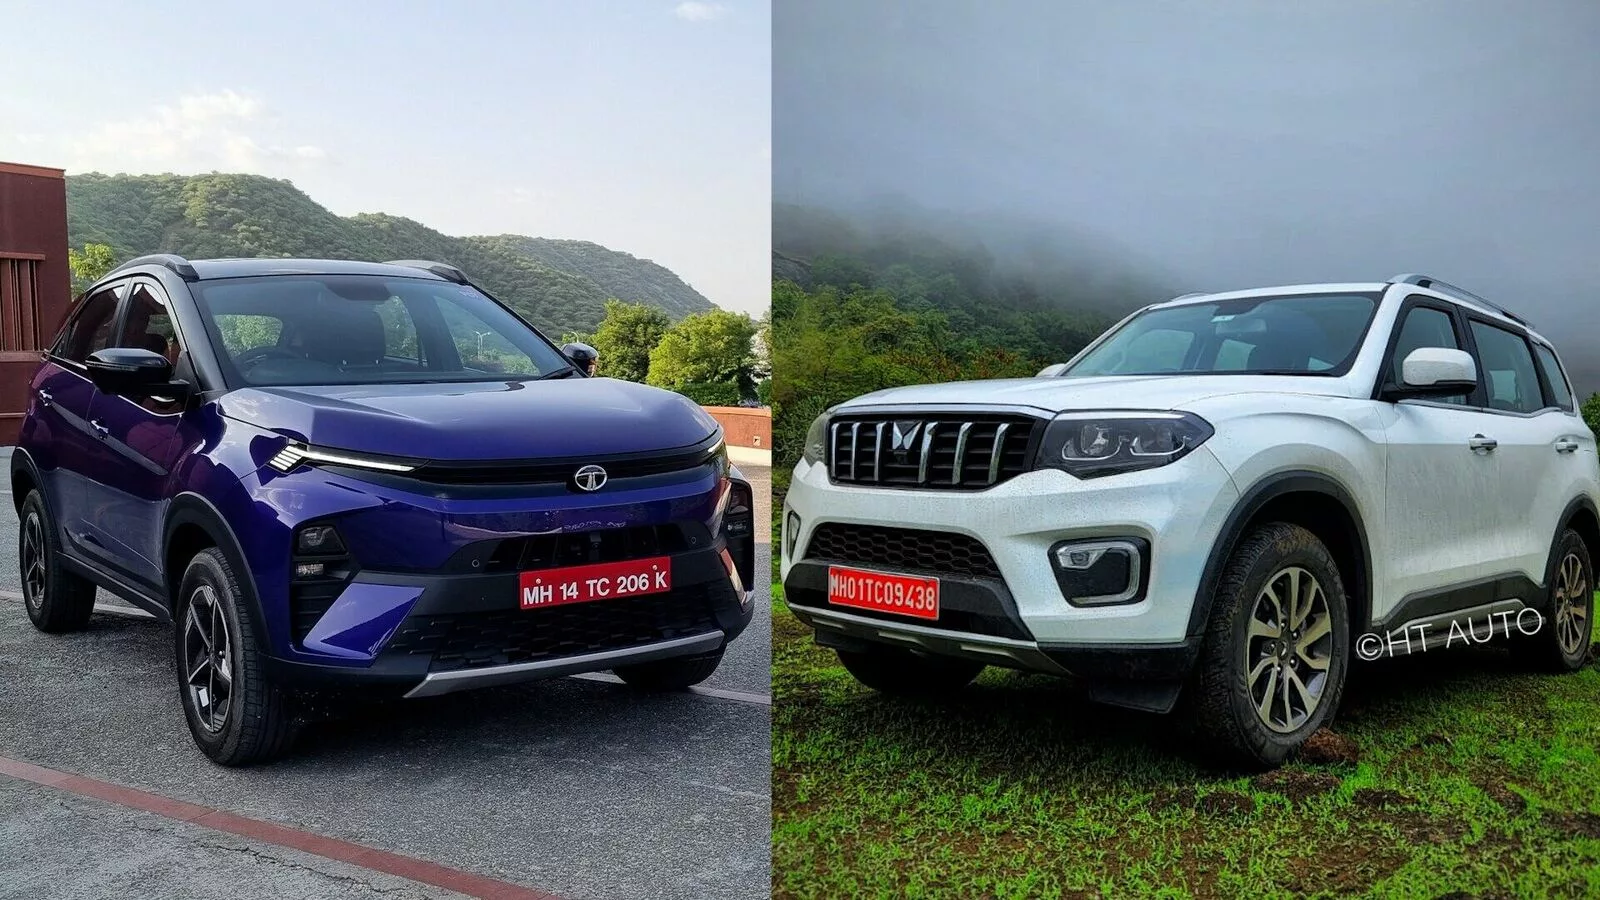 Nexon to Scorpio-N: India's safest SUVs with five-star safety ratings